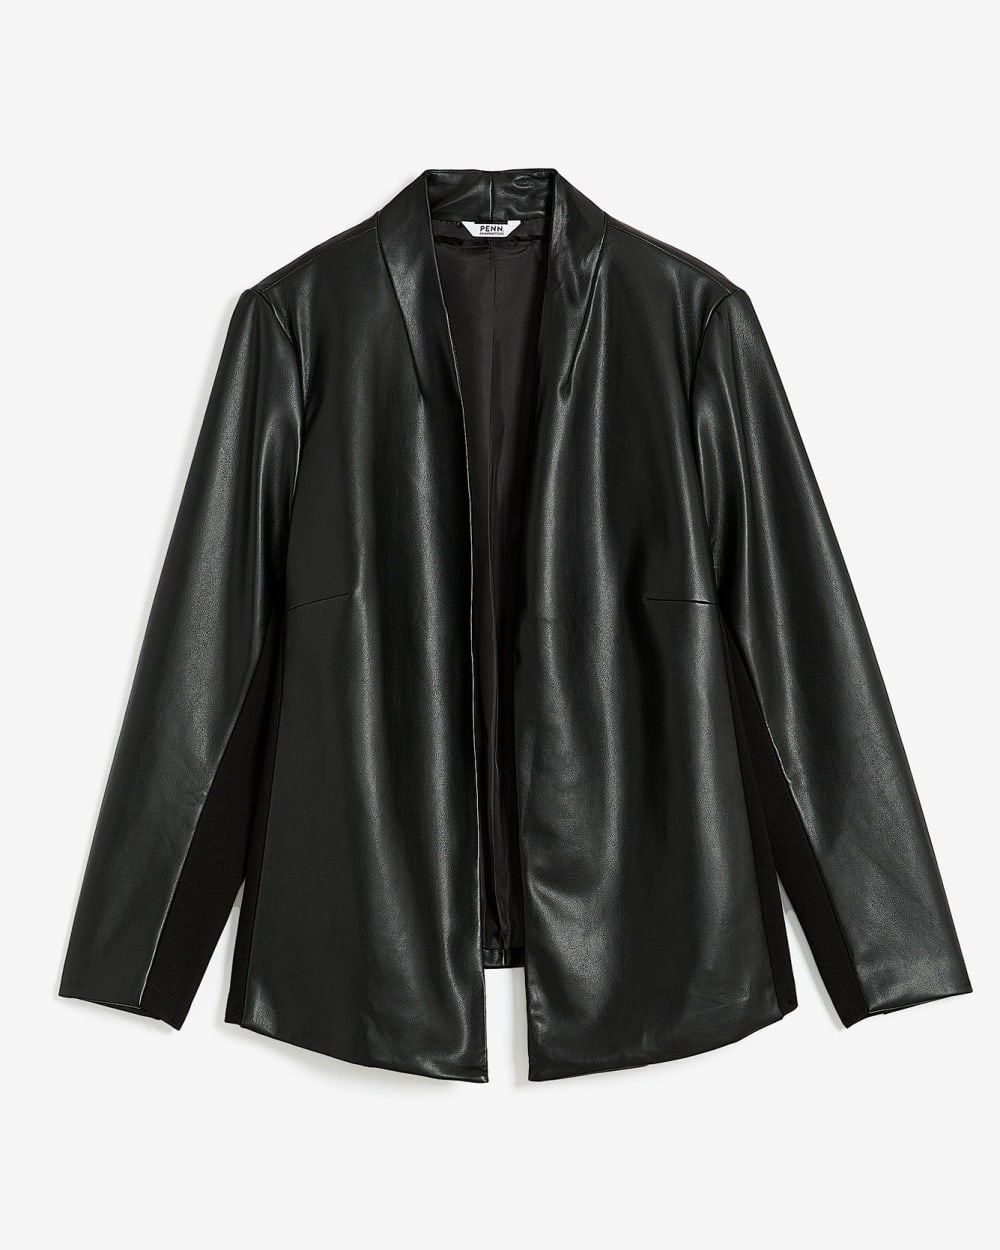 Black Faux Leather Jacket with Knit Inserts